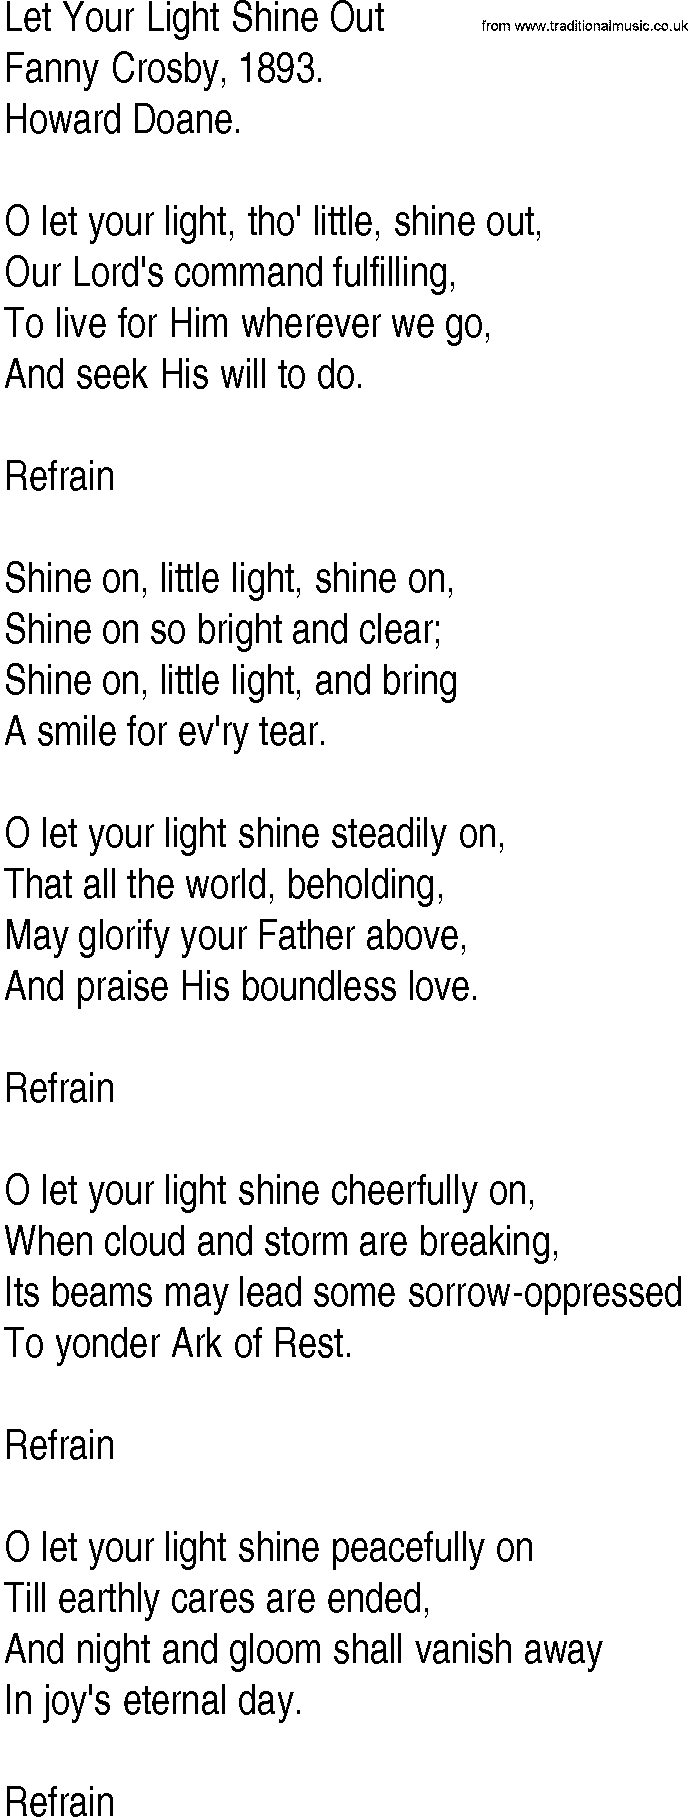 Hymn and Gospel Song: Let Your Light Shine Out by Fanny Crosby lyrics